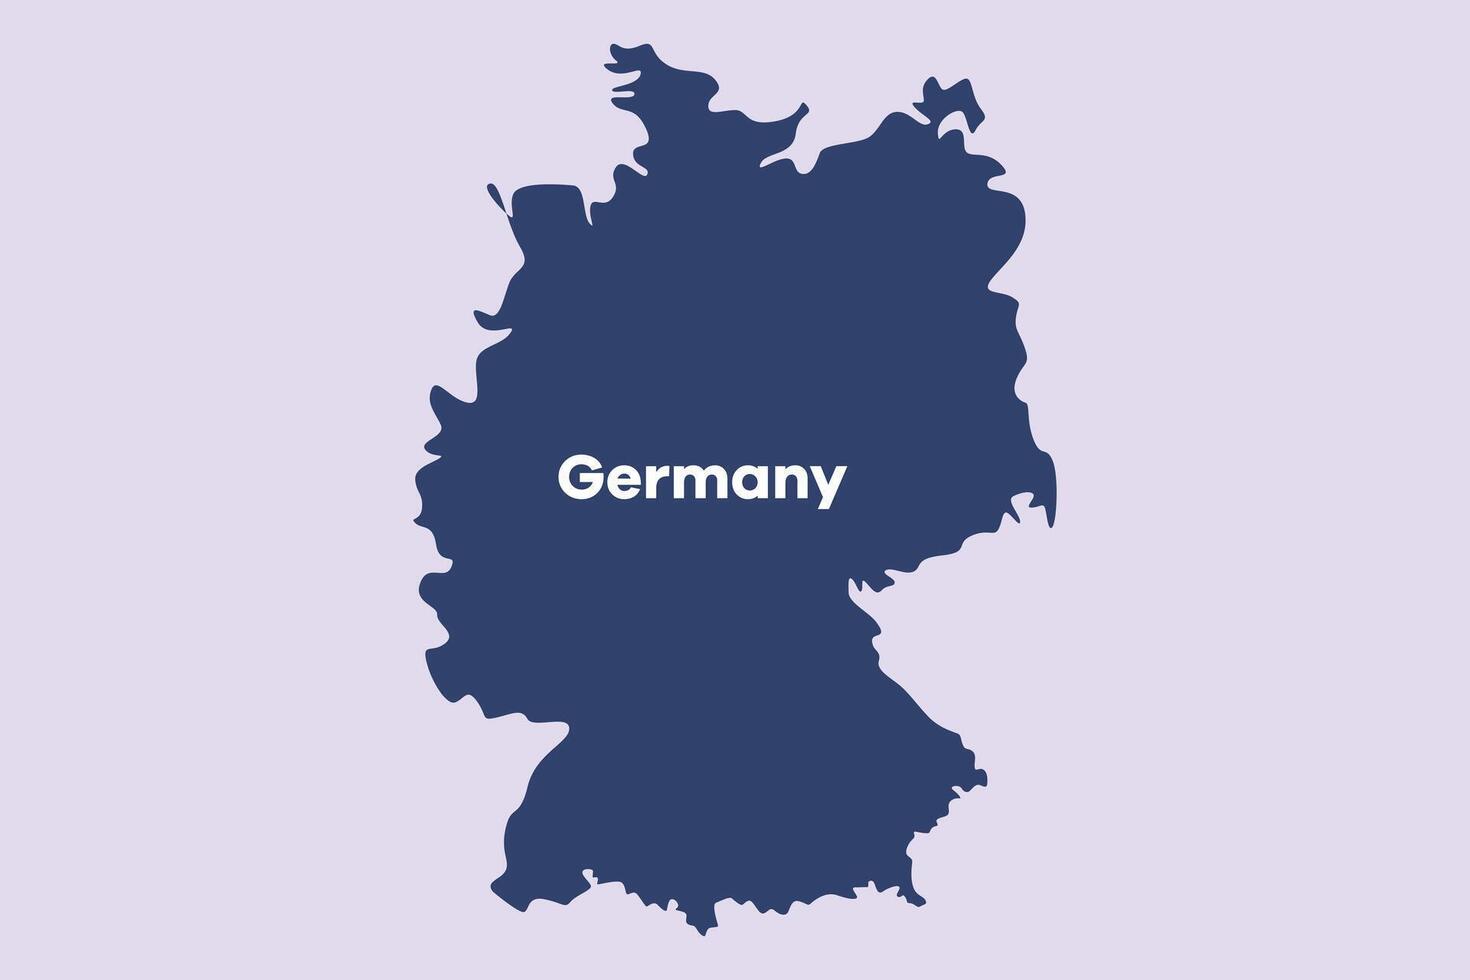 Map of Germany. World map concept. Colored flat vector illustration isolated.